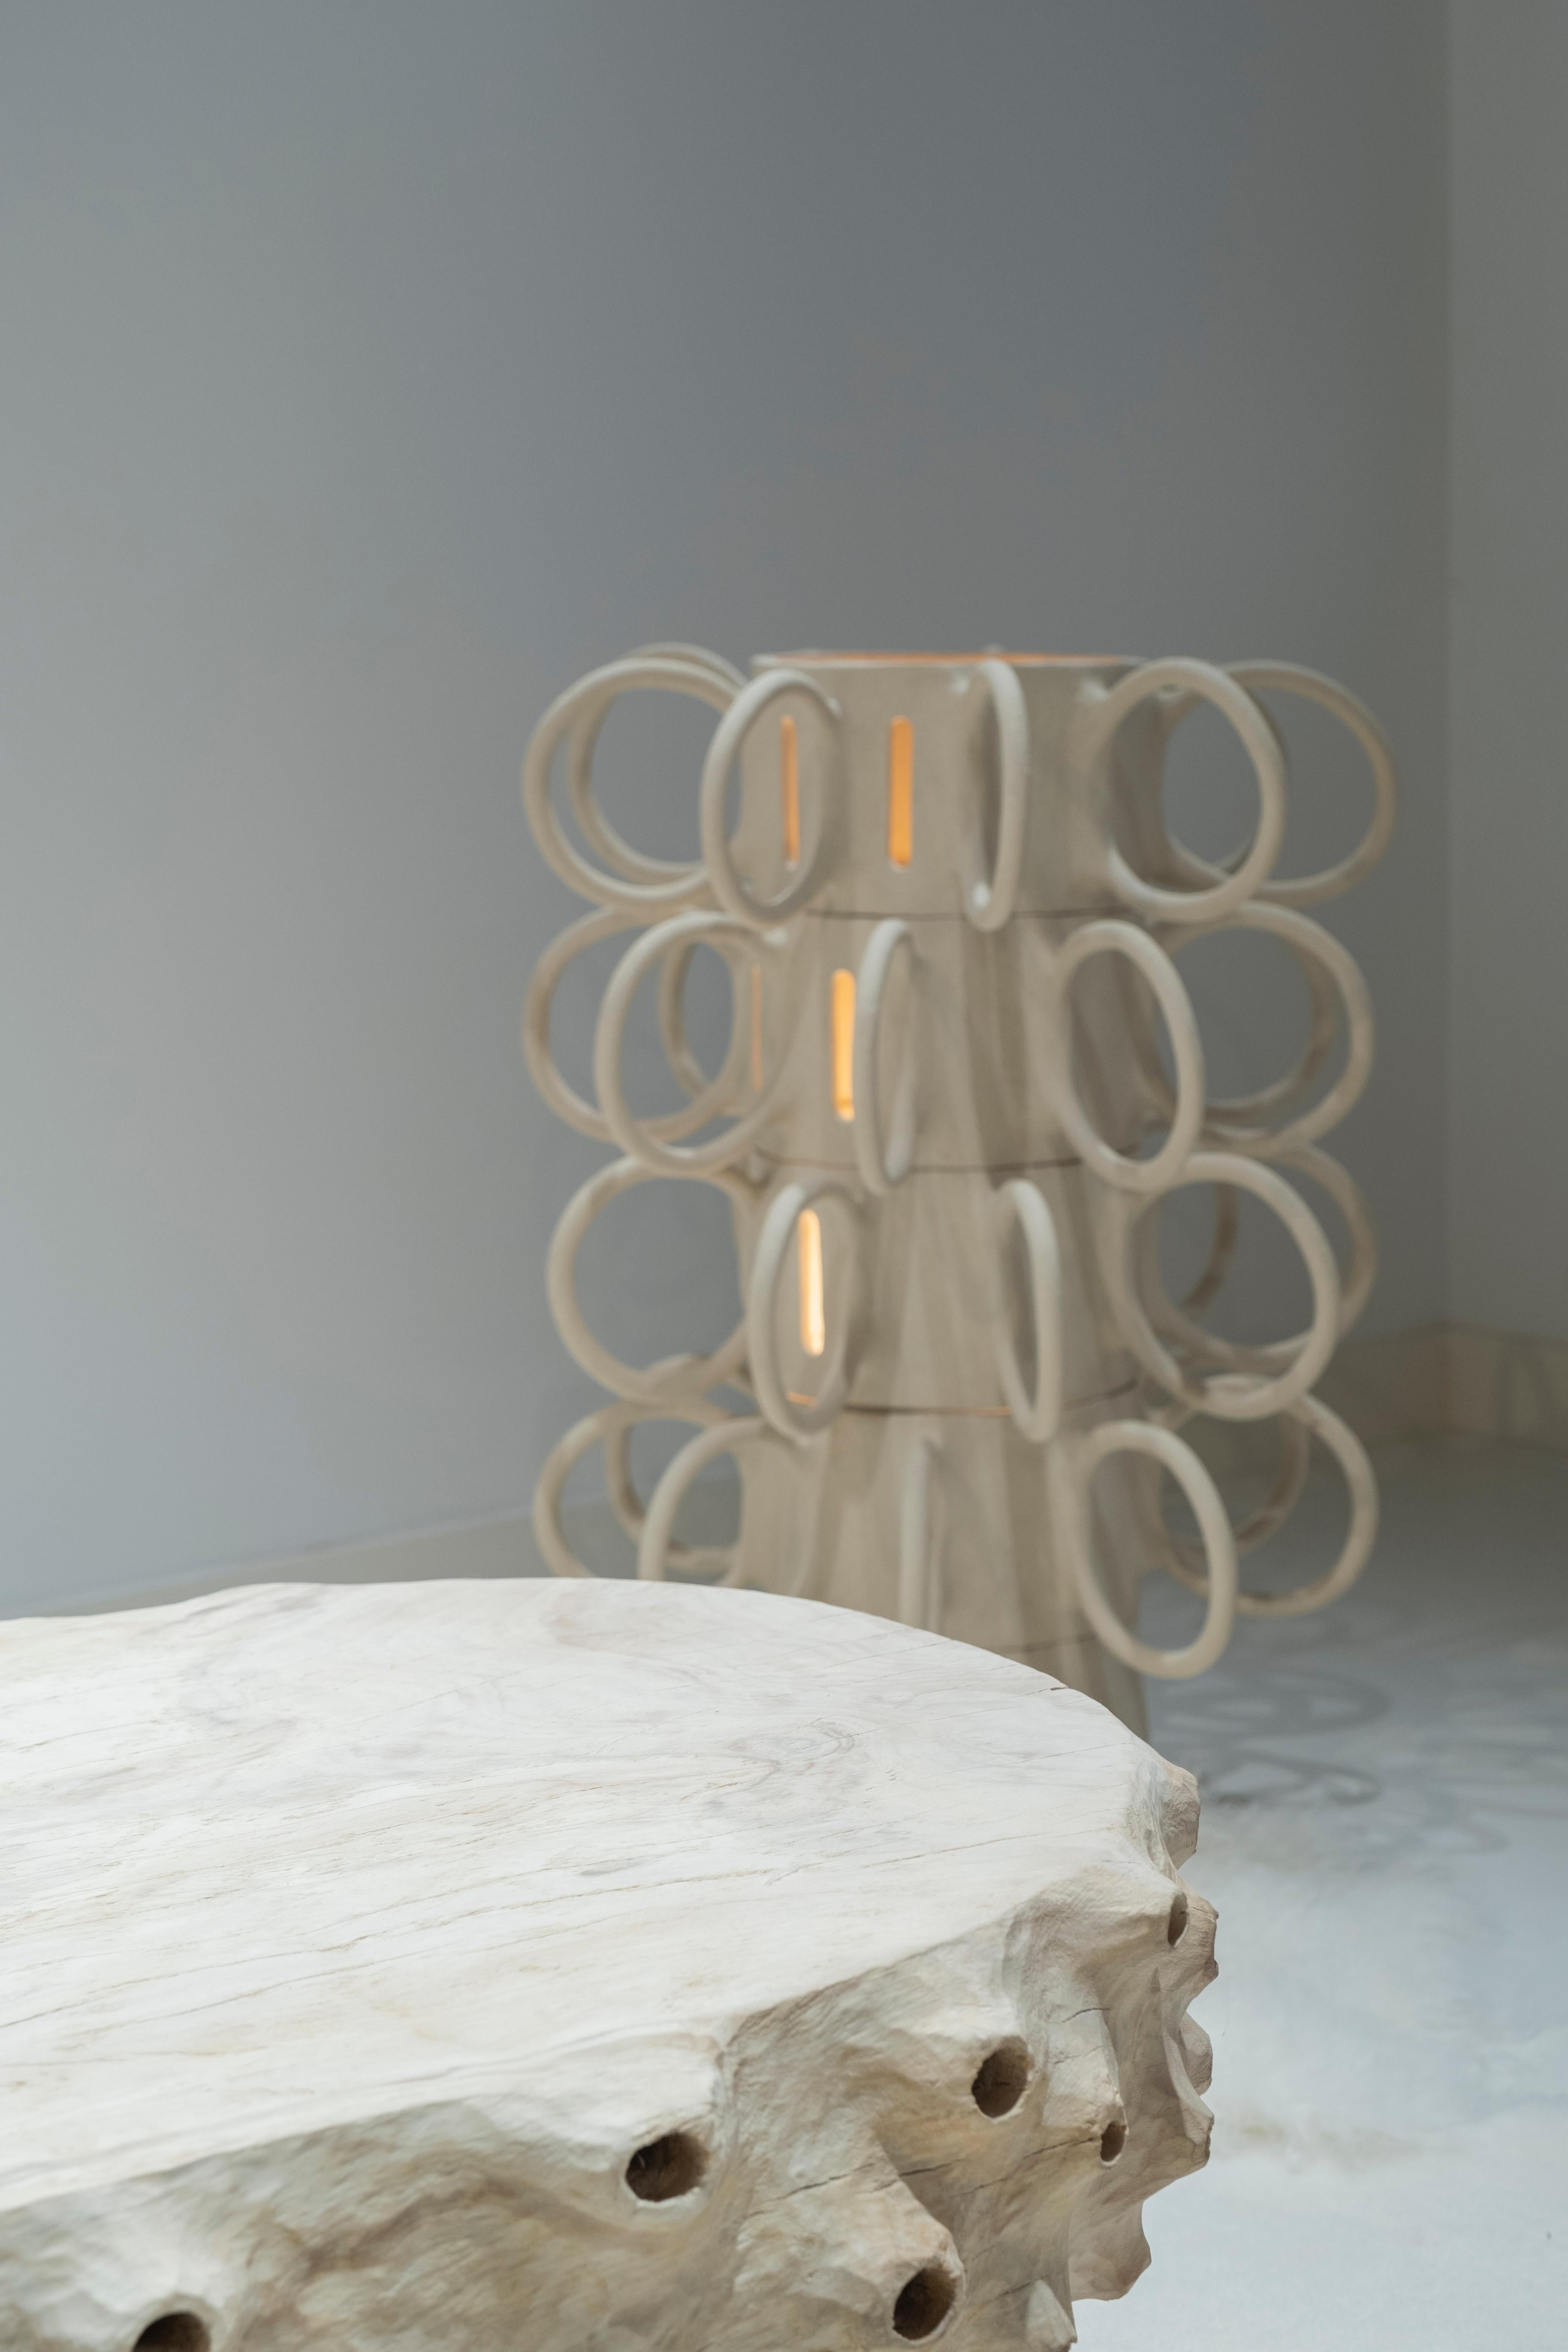 Ceramic lamp by Pia Chevalier
Materials: Ceramic
Dimensions: W 25 x D 25 x 75 cm

Pia Chevalier is a French contemporary designer.
Independent designer, trained in design and crafts and more specifically on the sets and surface treatments, at